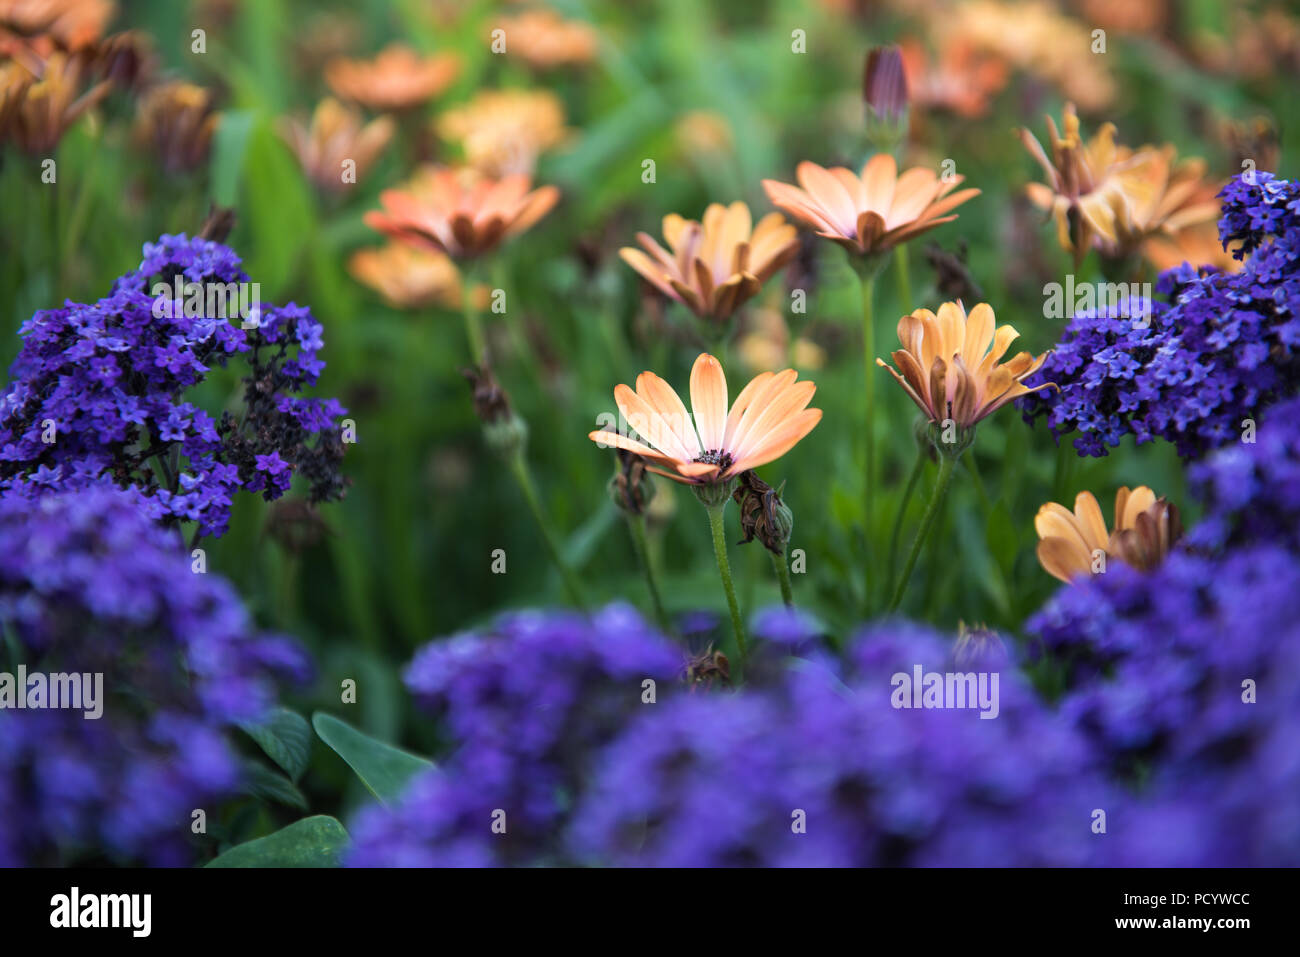 Contrast of orange and purple flowers in a field of flowers Stock Photo